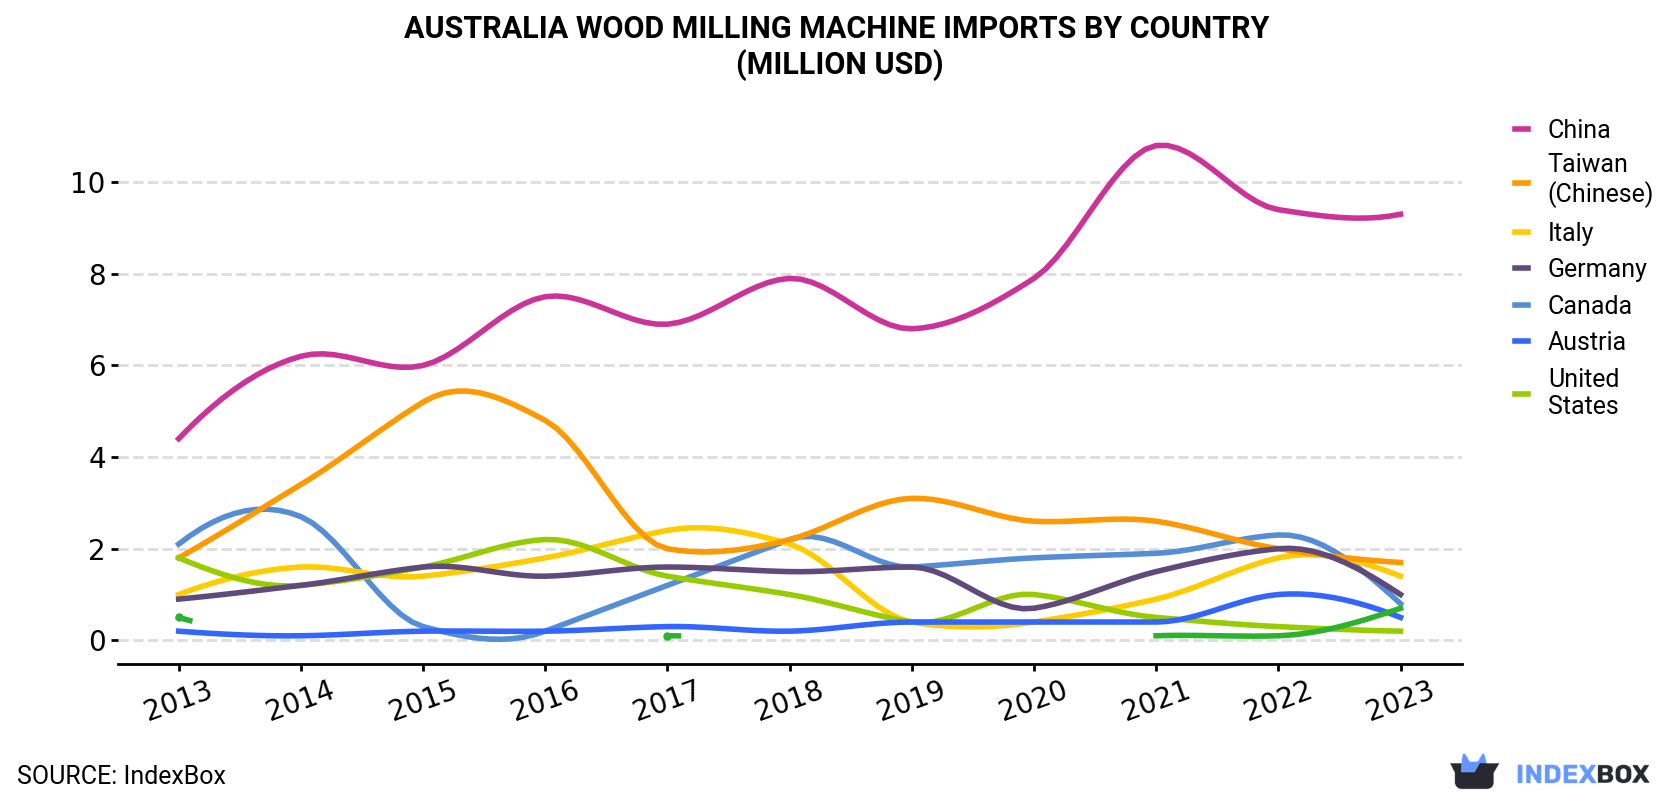 Australia Wood Milling Machine Imports By Country (Million USD)